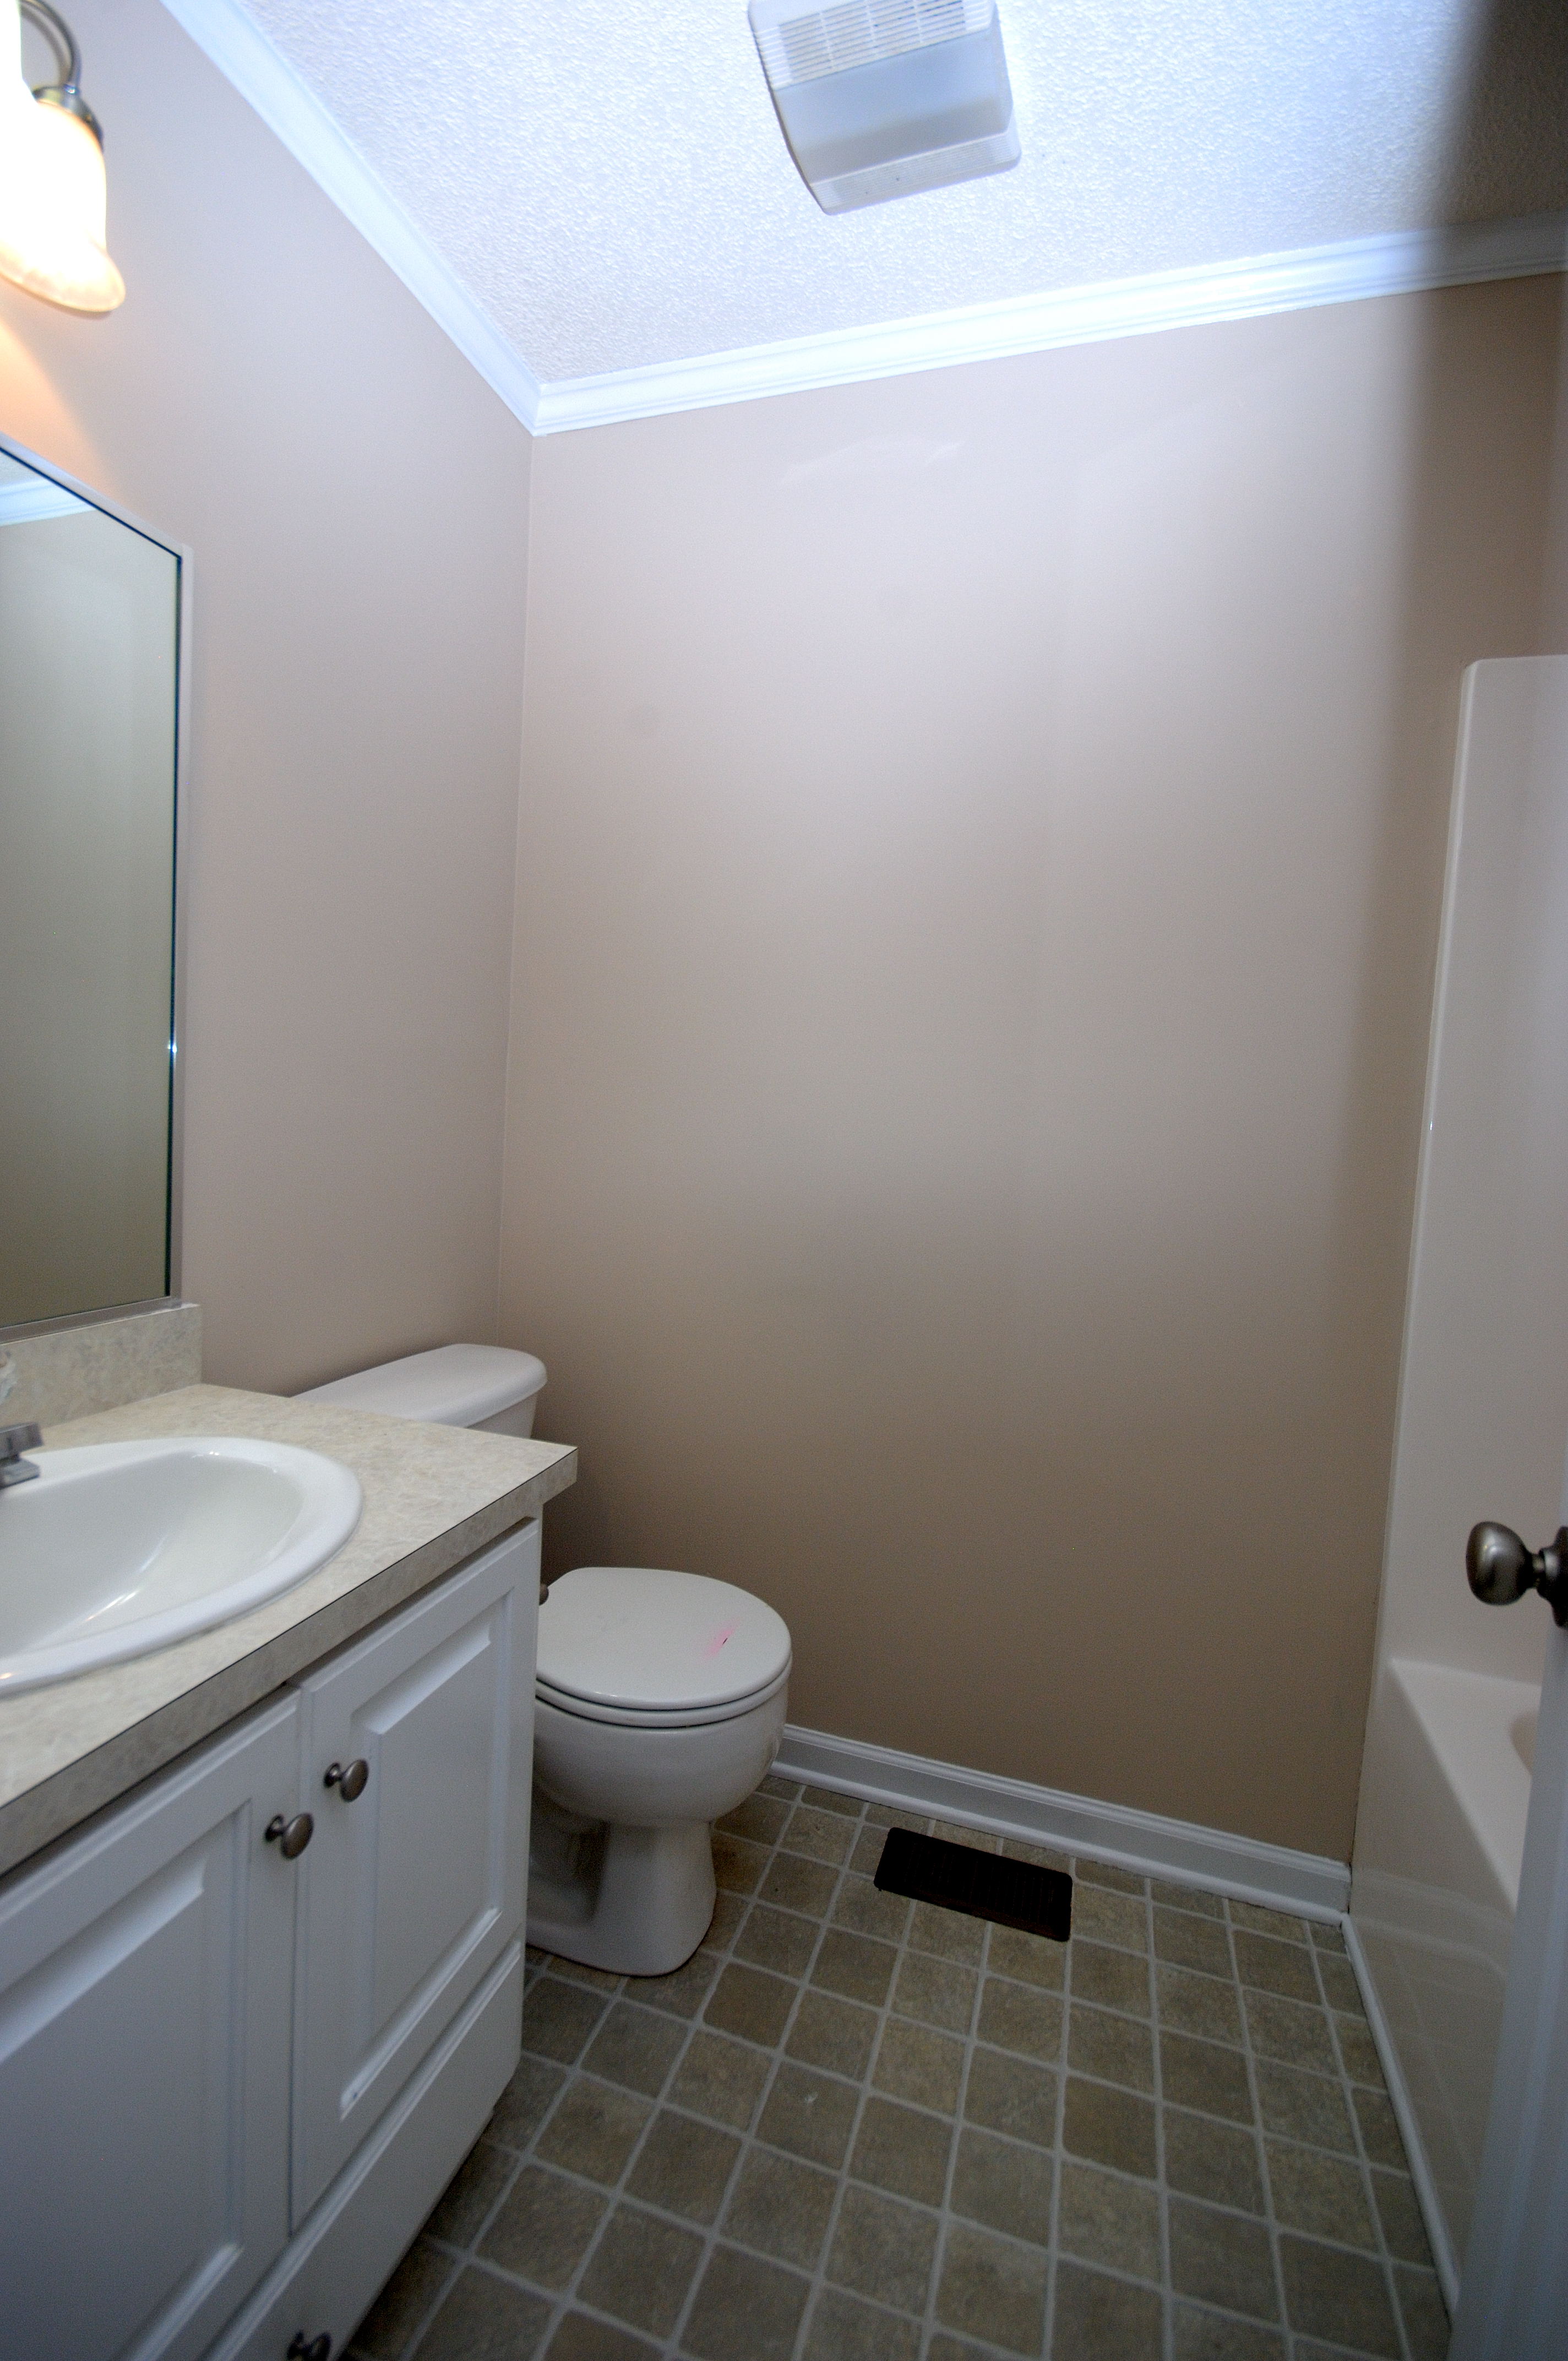 Goldsboro NC - Homes for Rent - 220 Koufax Drive Pikeville NC 27863 - Master Bathroom